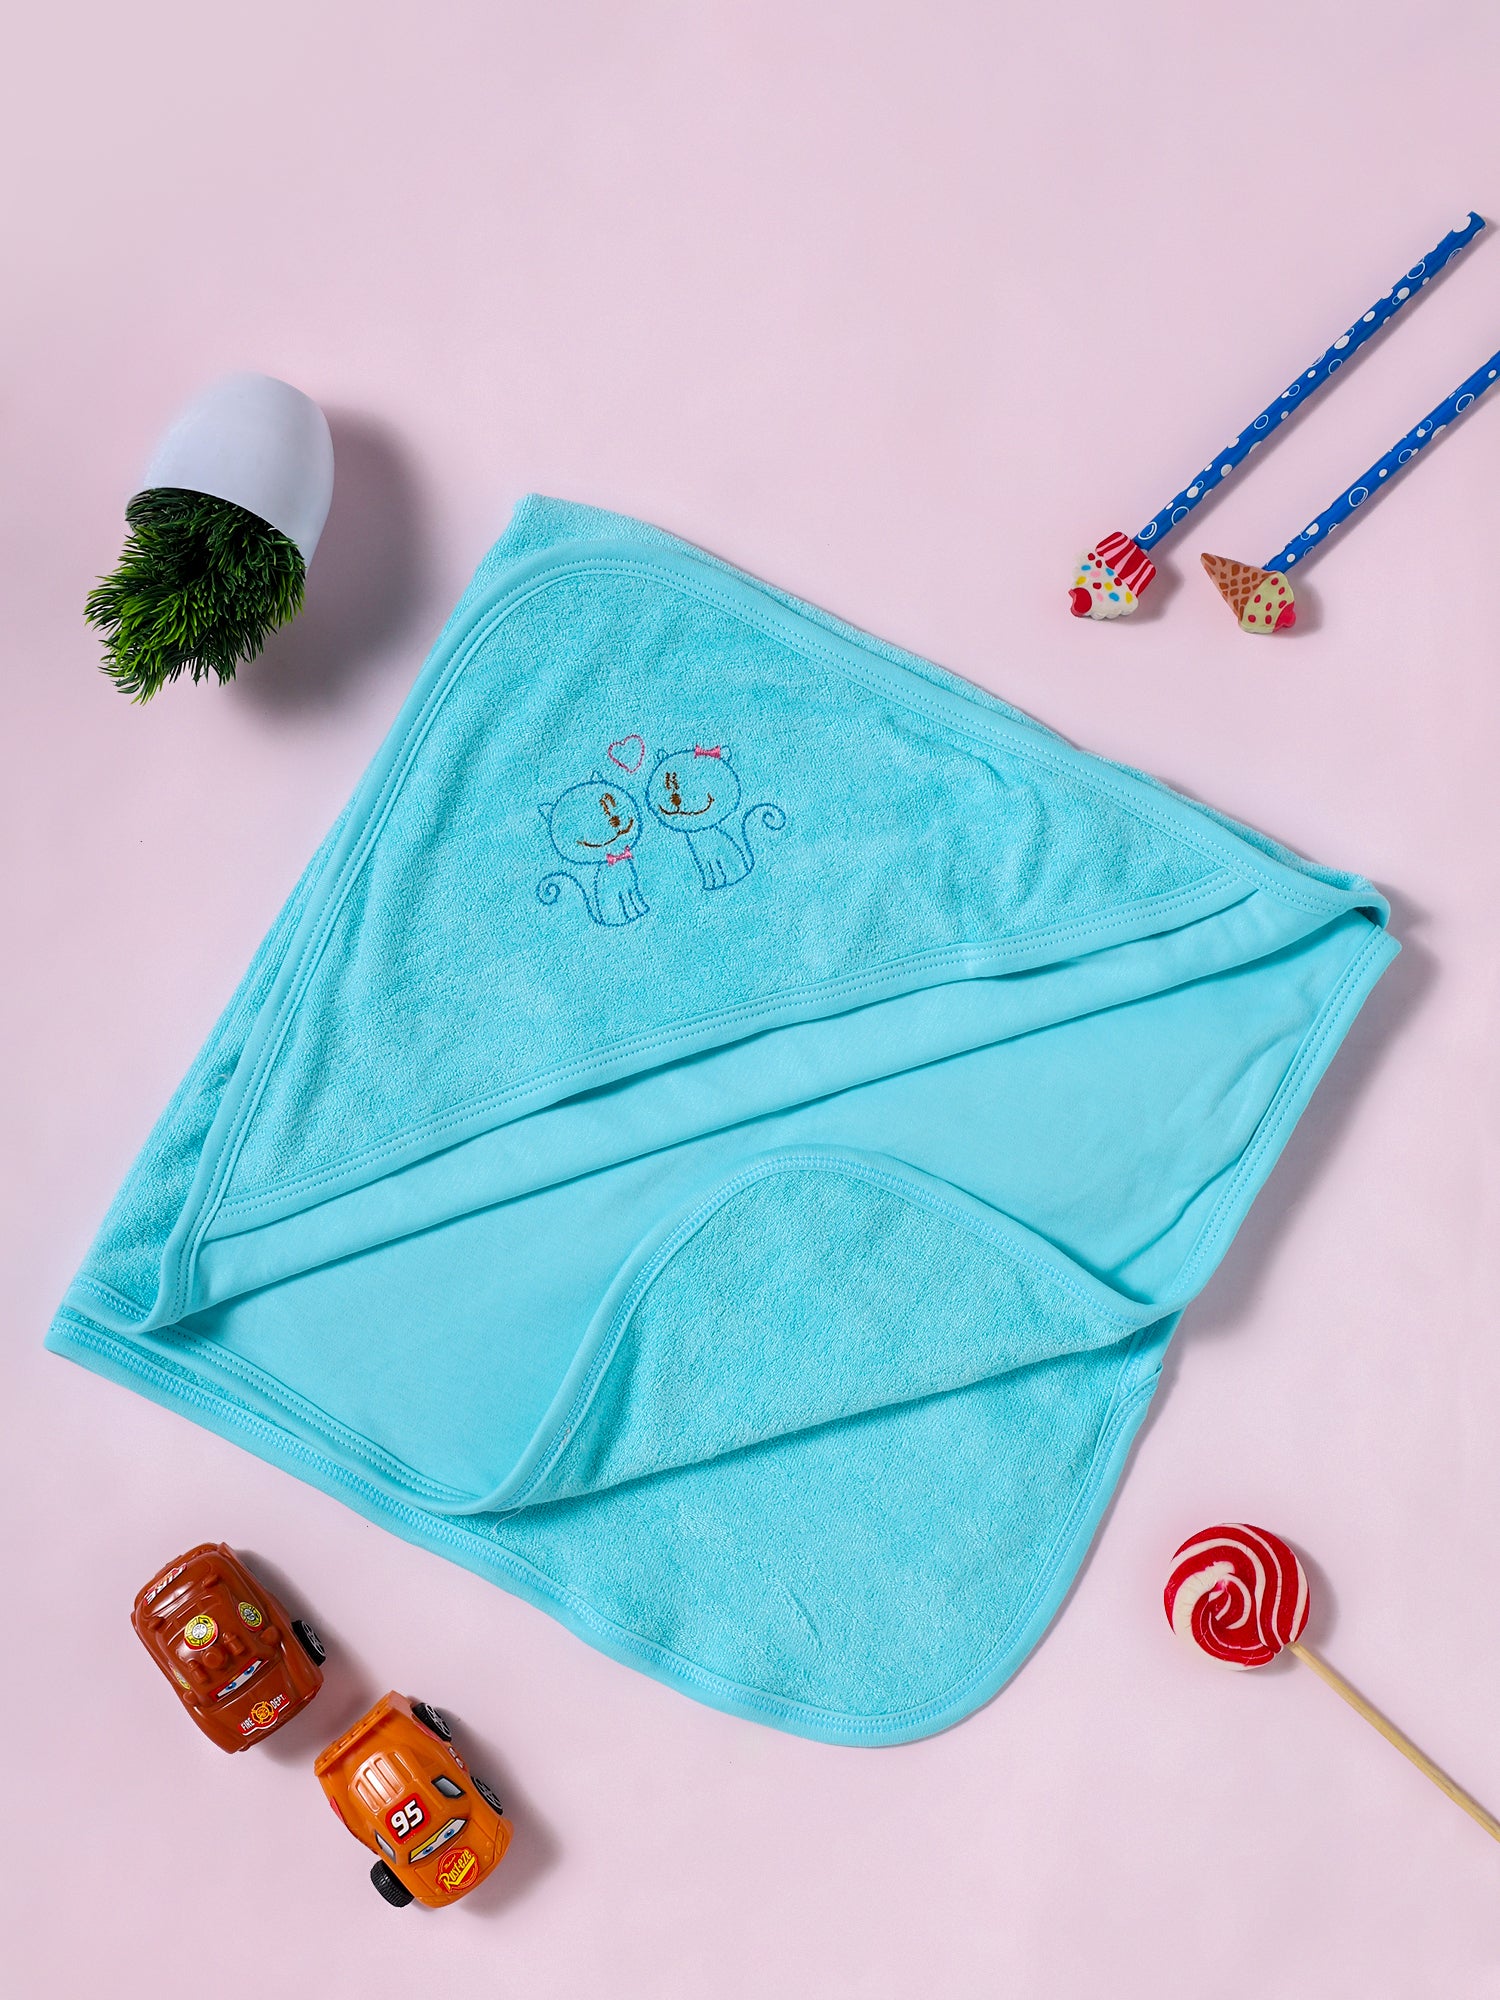 Oh Baby Plain Embroidery Carry  Towel Light Blue - Htpr